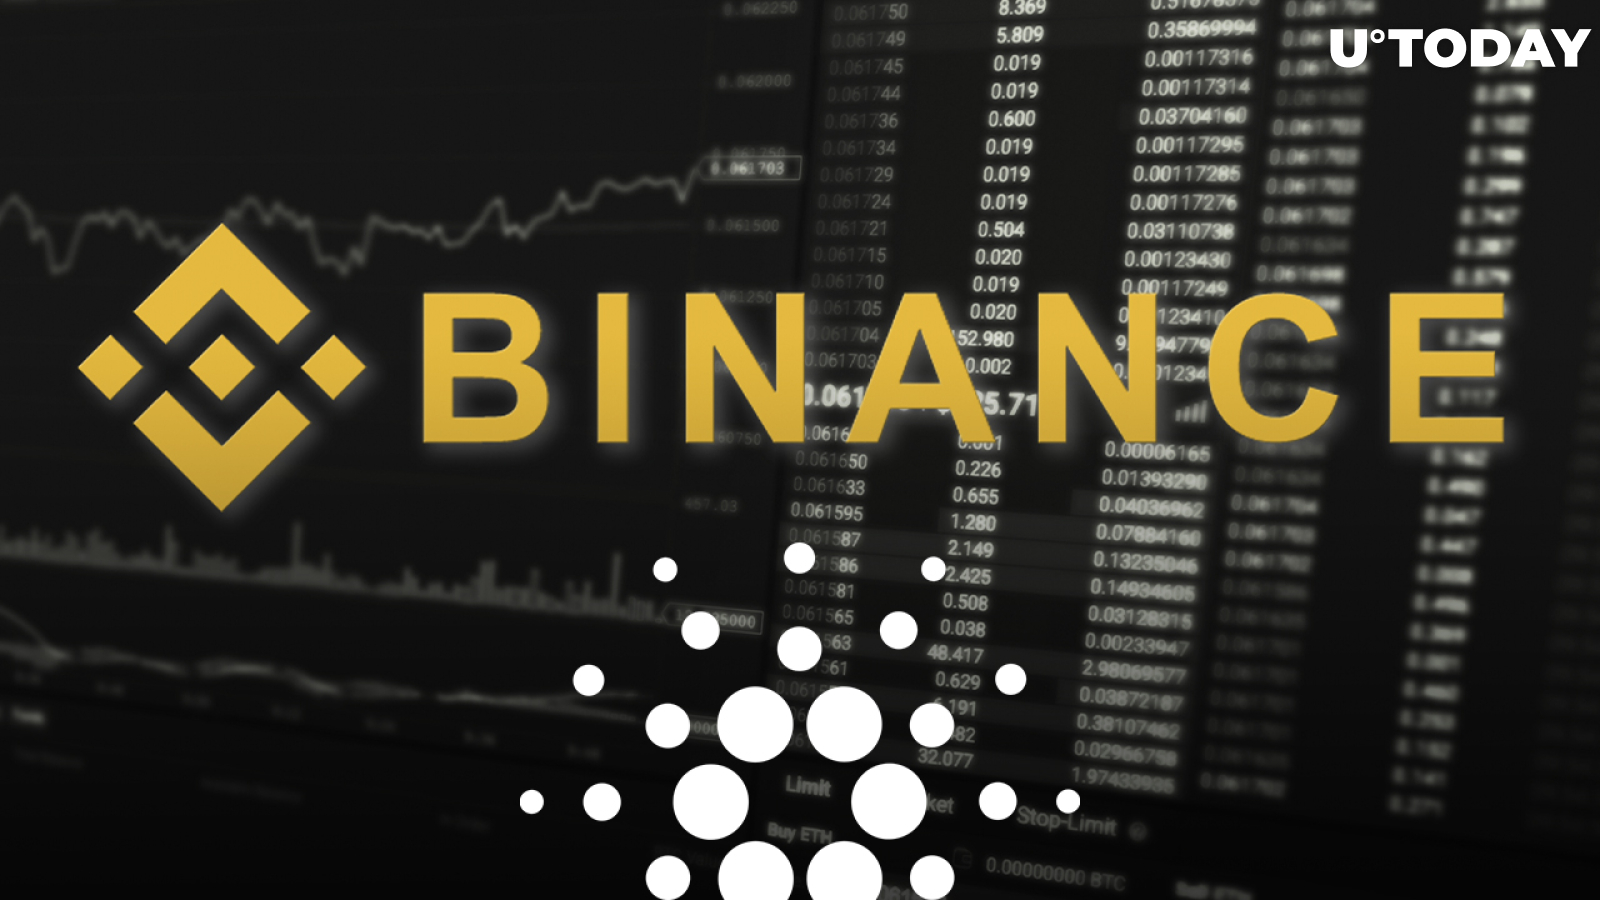 Cardano's Annual Interest Rate Spikes to 54% as Binance Running Short on Supply